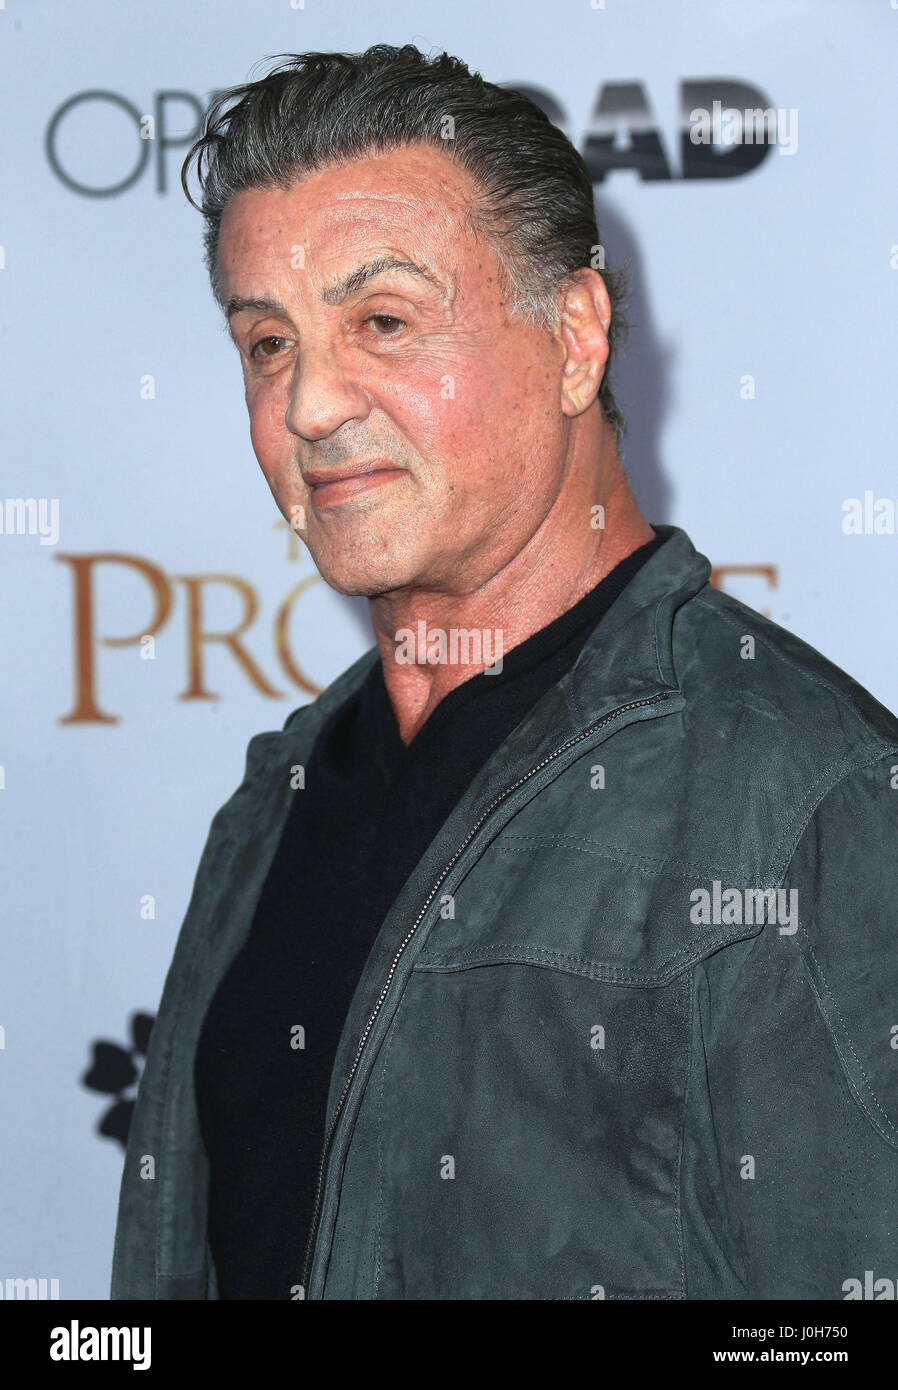 Hollywood, California, USA. 12th Apr, 2017. Sylvester Stallone. Premiere Of Open Road Films' ''The Promise'' held at TCL Chinese Theatre. Photo Credit: AdMedia (Credit Image: © AdMedia via ZUMA Wire) Credit: ZUMA Press, Inc./Alamy Live News Stock Photo